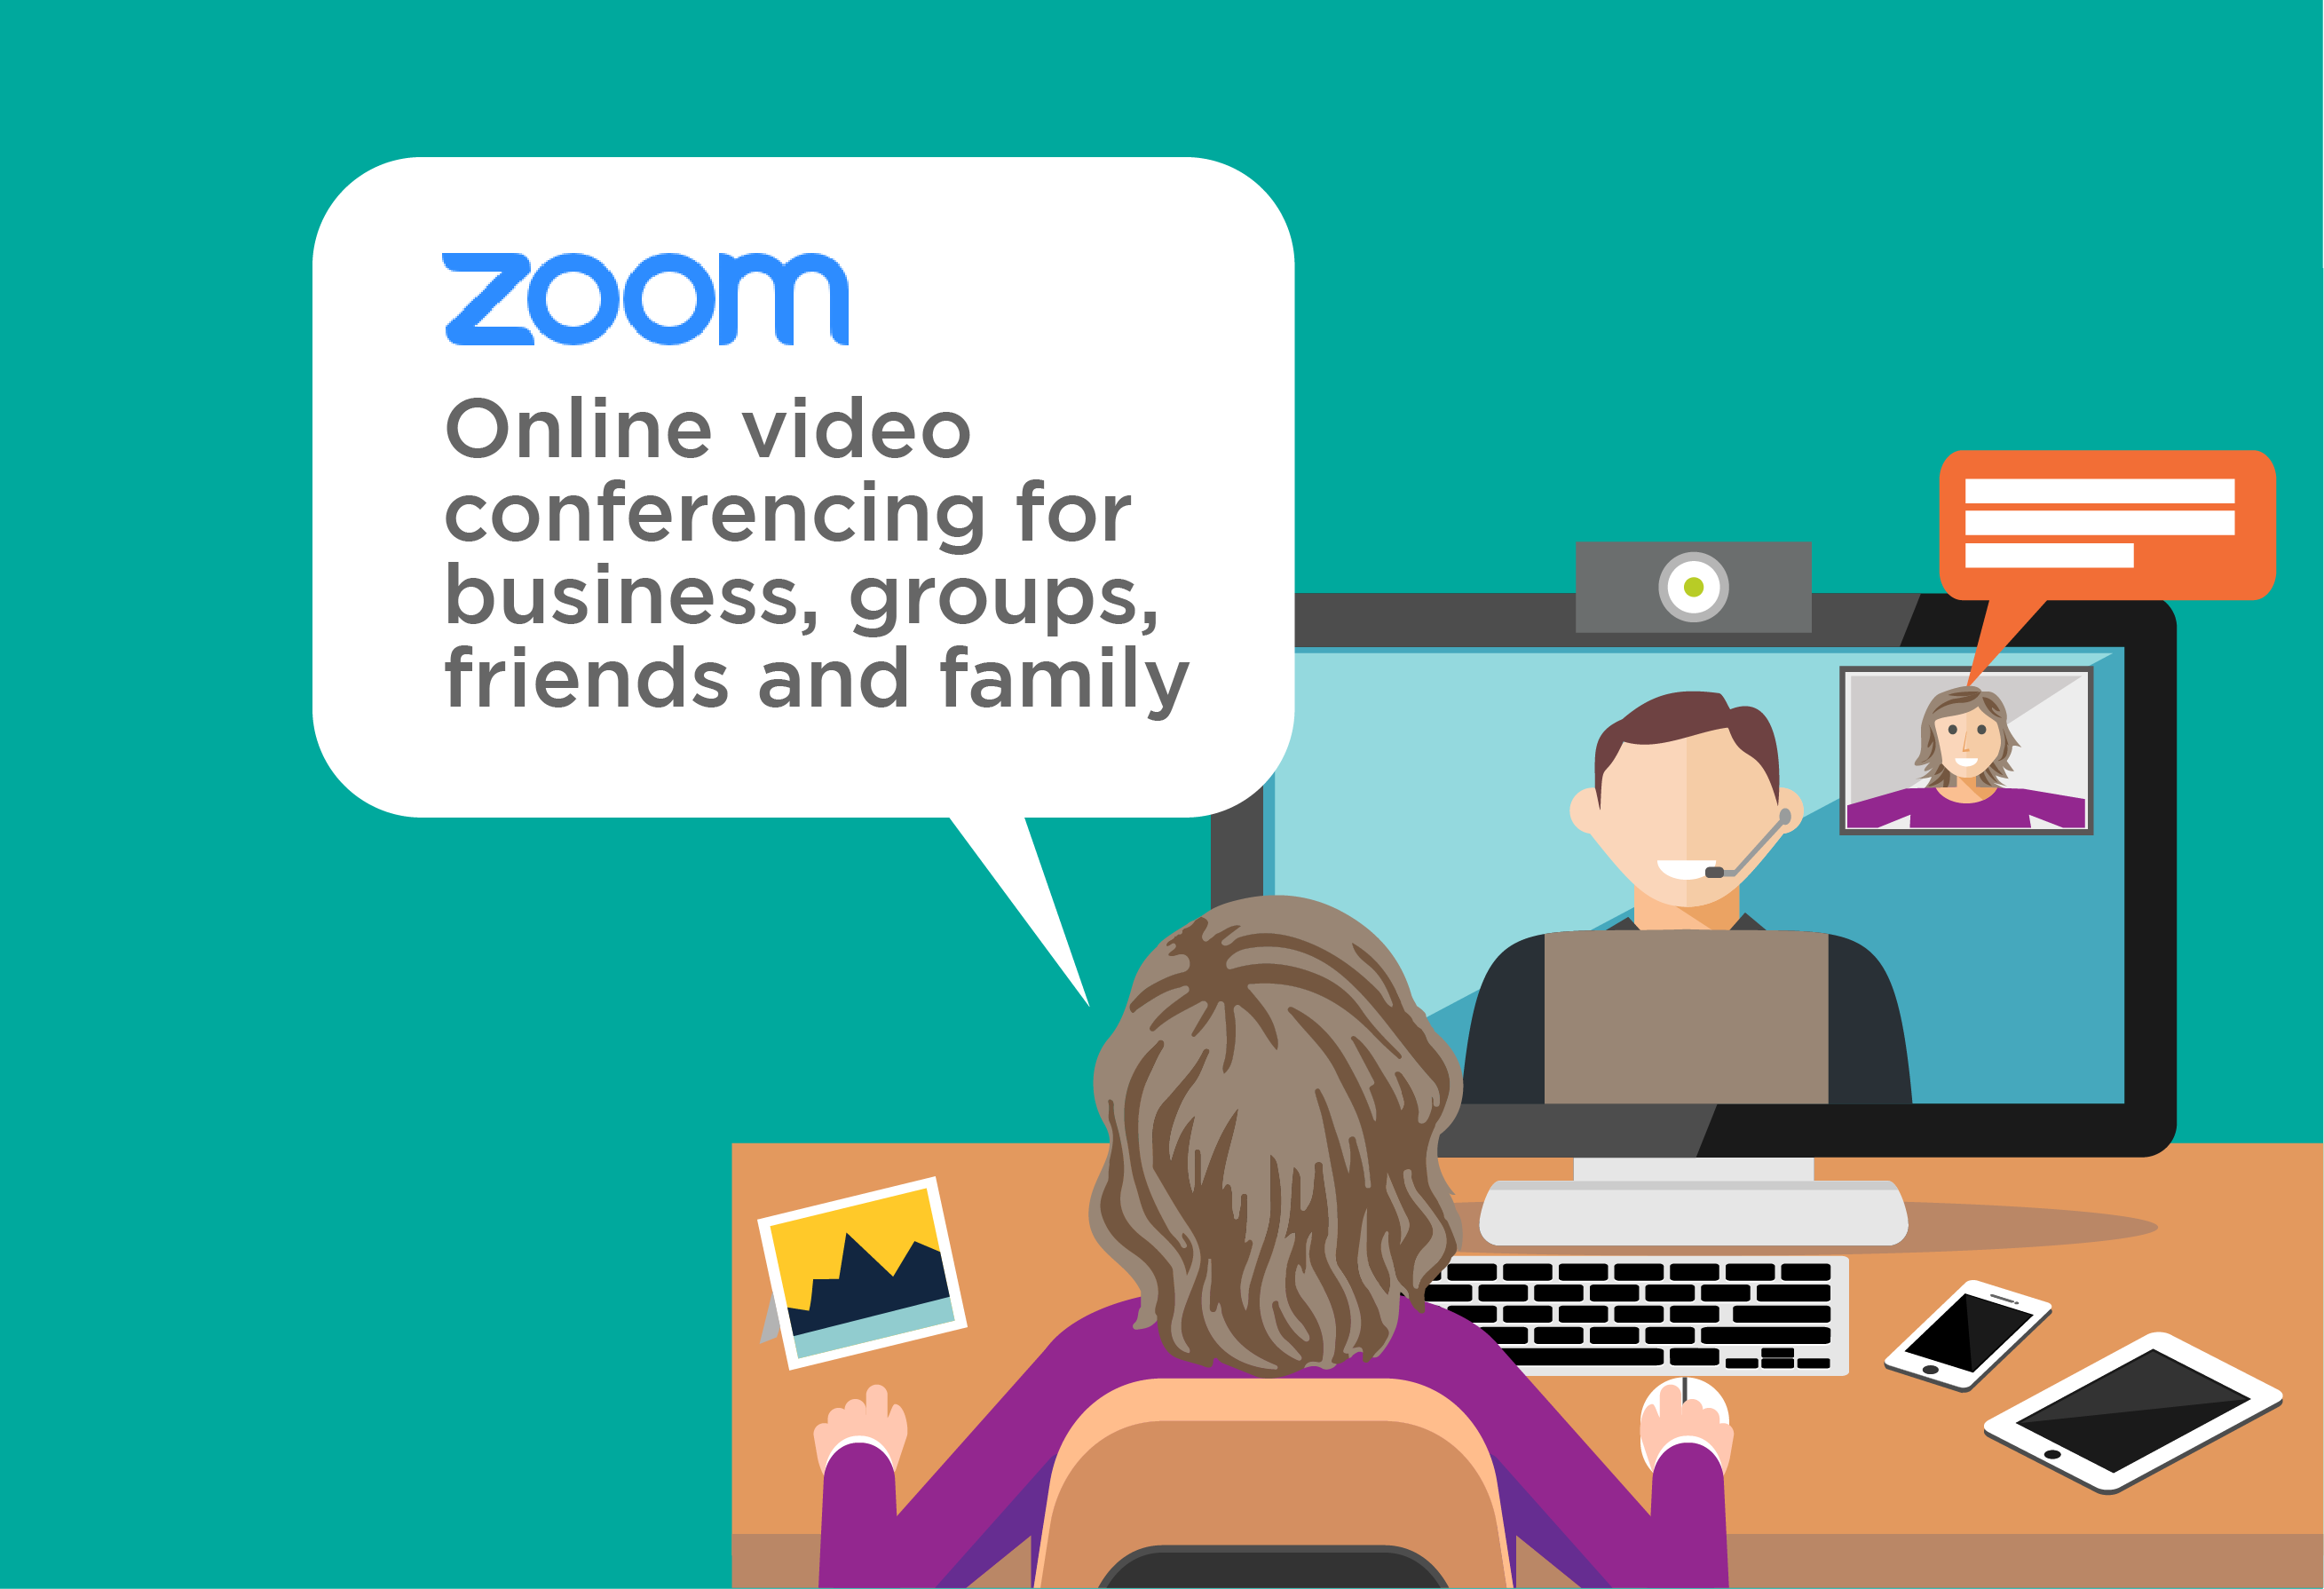 What is Zoom video conferencing?